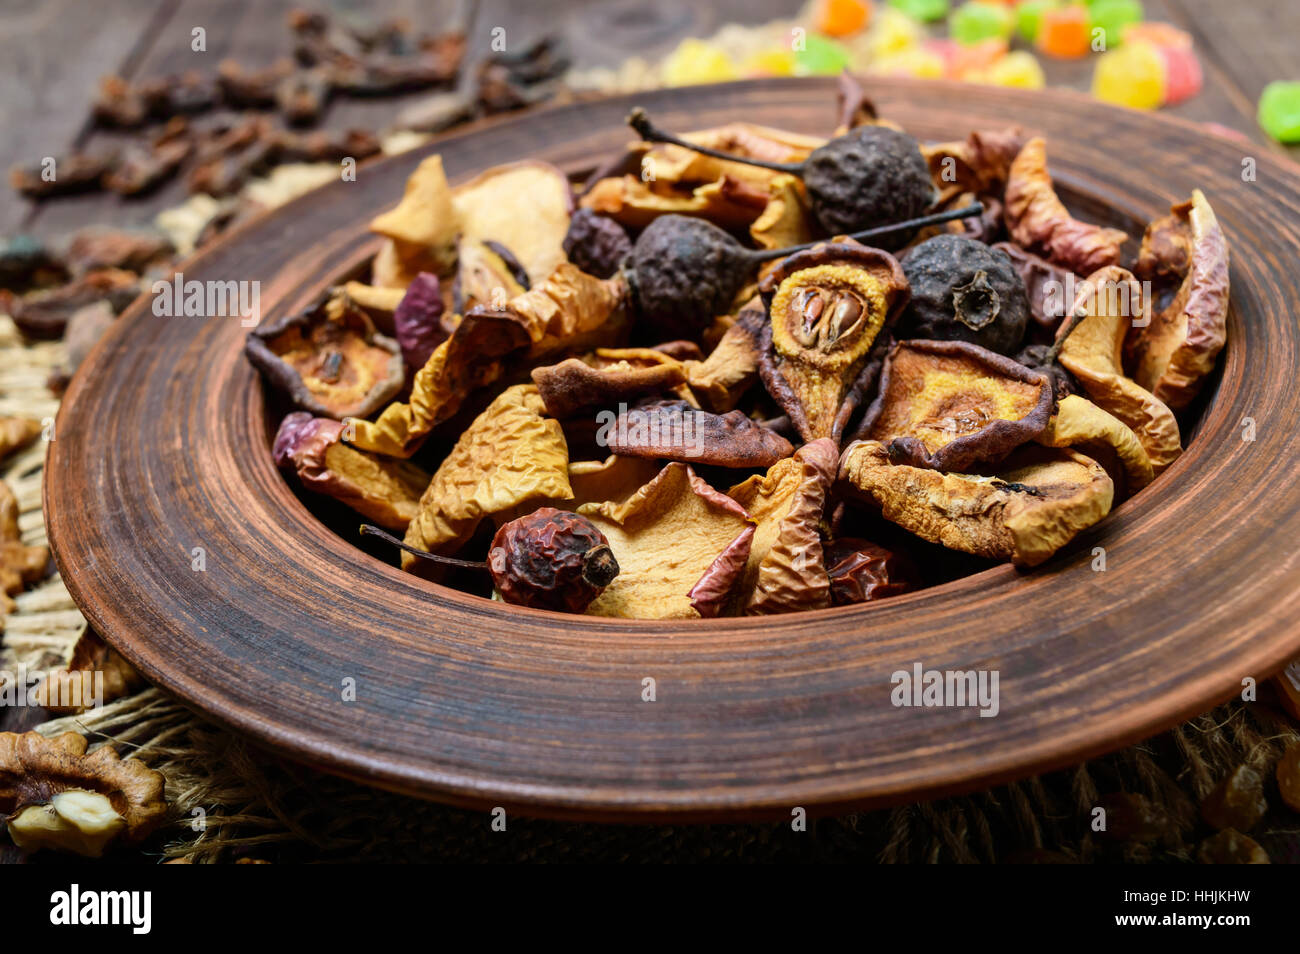 Dried fruit (apples, pears, apricots), berries, raisins and nuts in a bowl on dark wooden background. Close up. Stock Photo